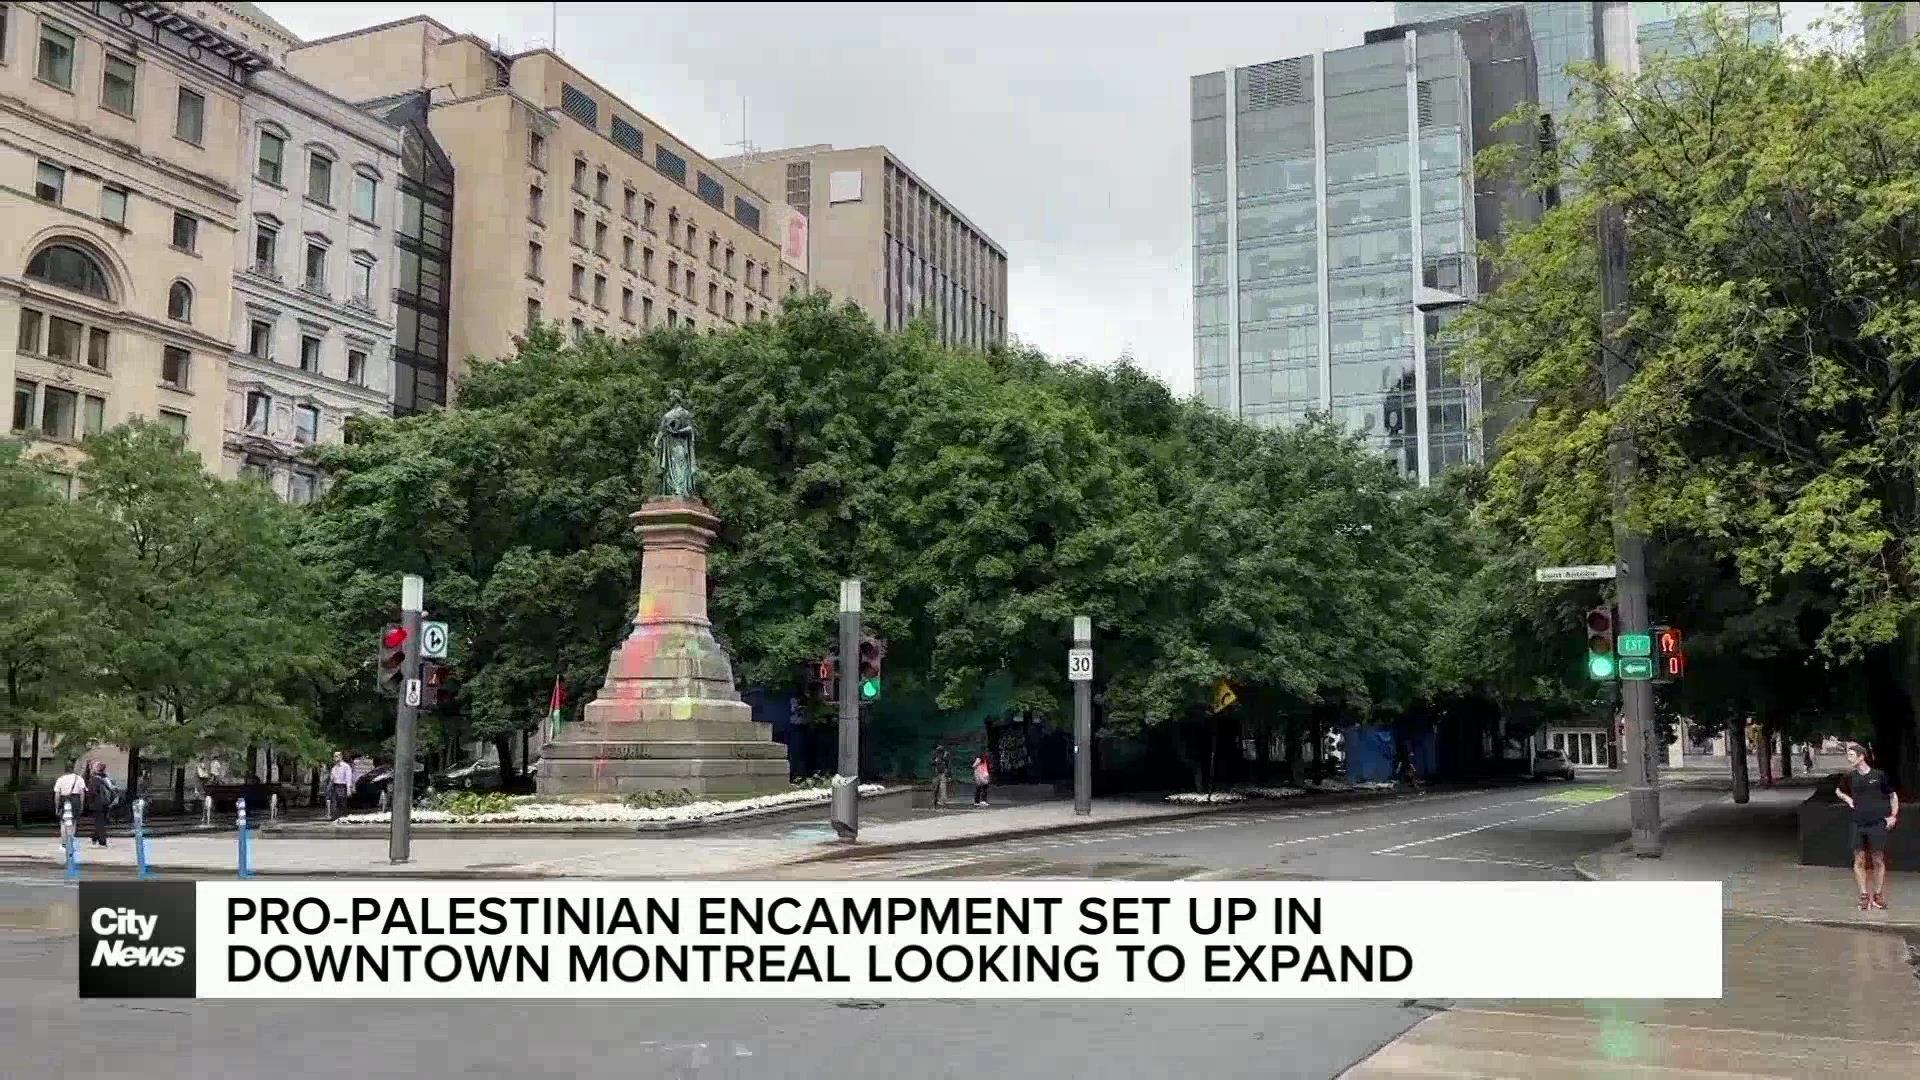 Pro-Palestinian encampment in downtown Montreal looking to expand